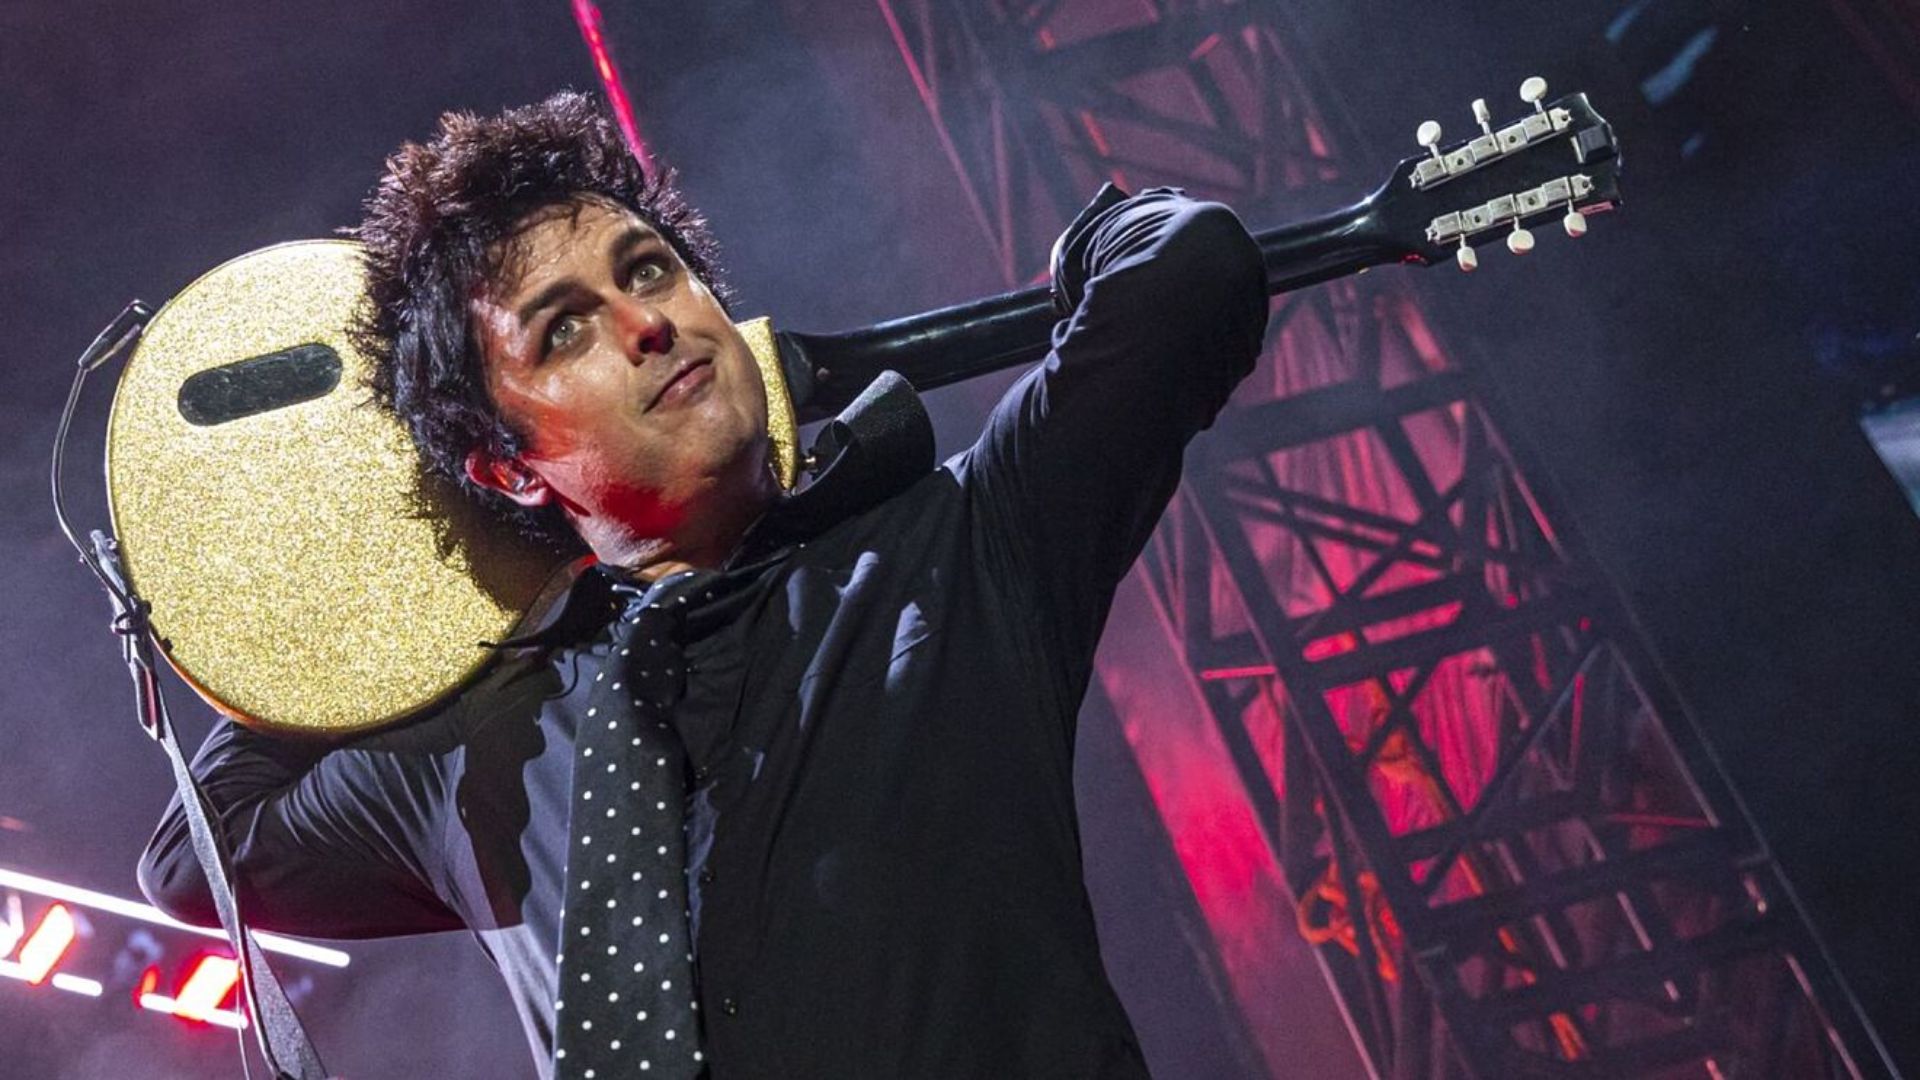 How Old Is Billie Joe Armstrong, His Education, And His Career